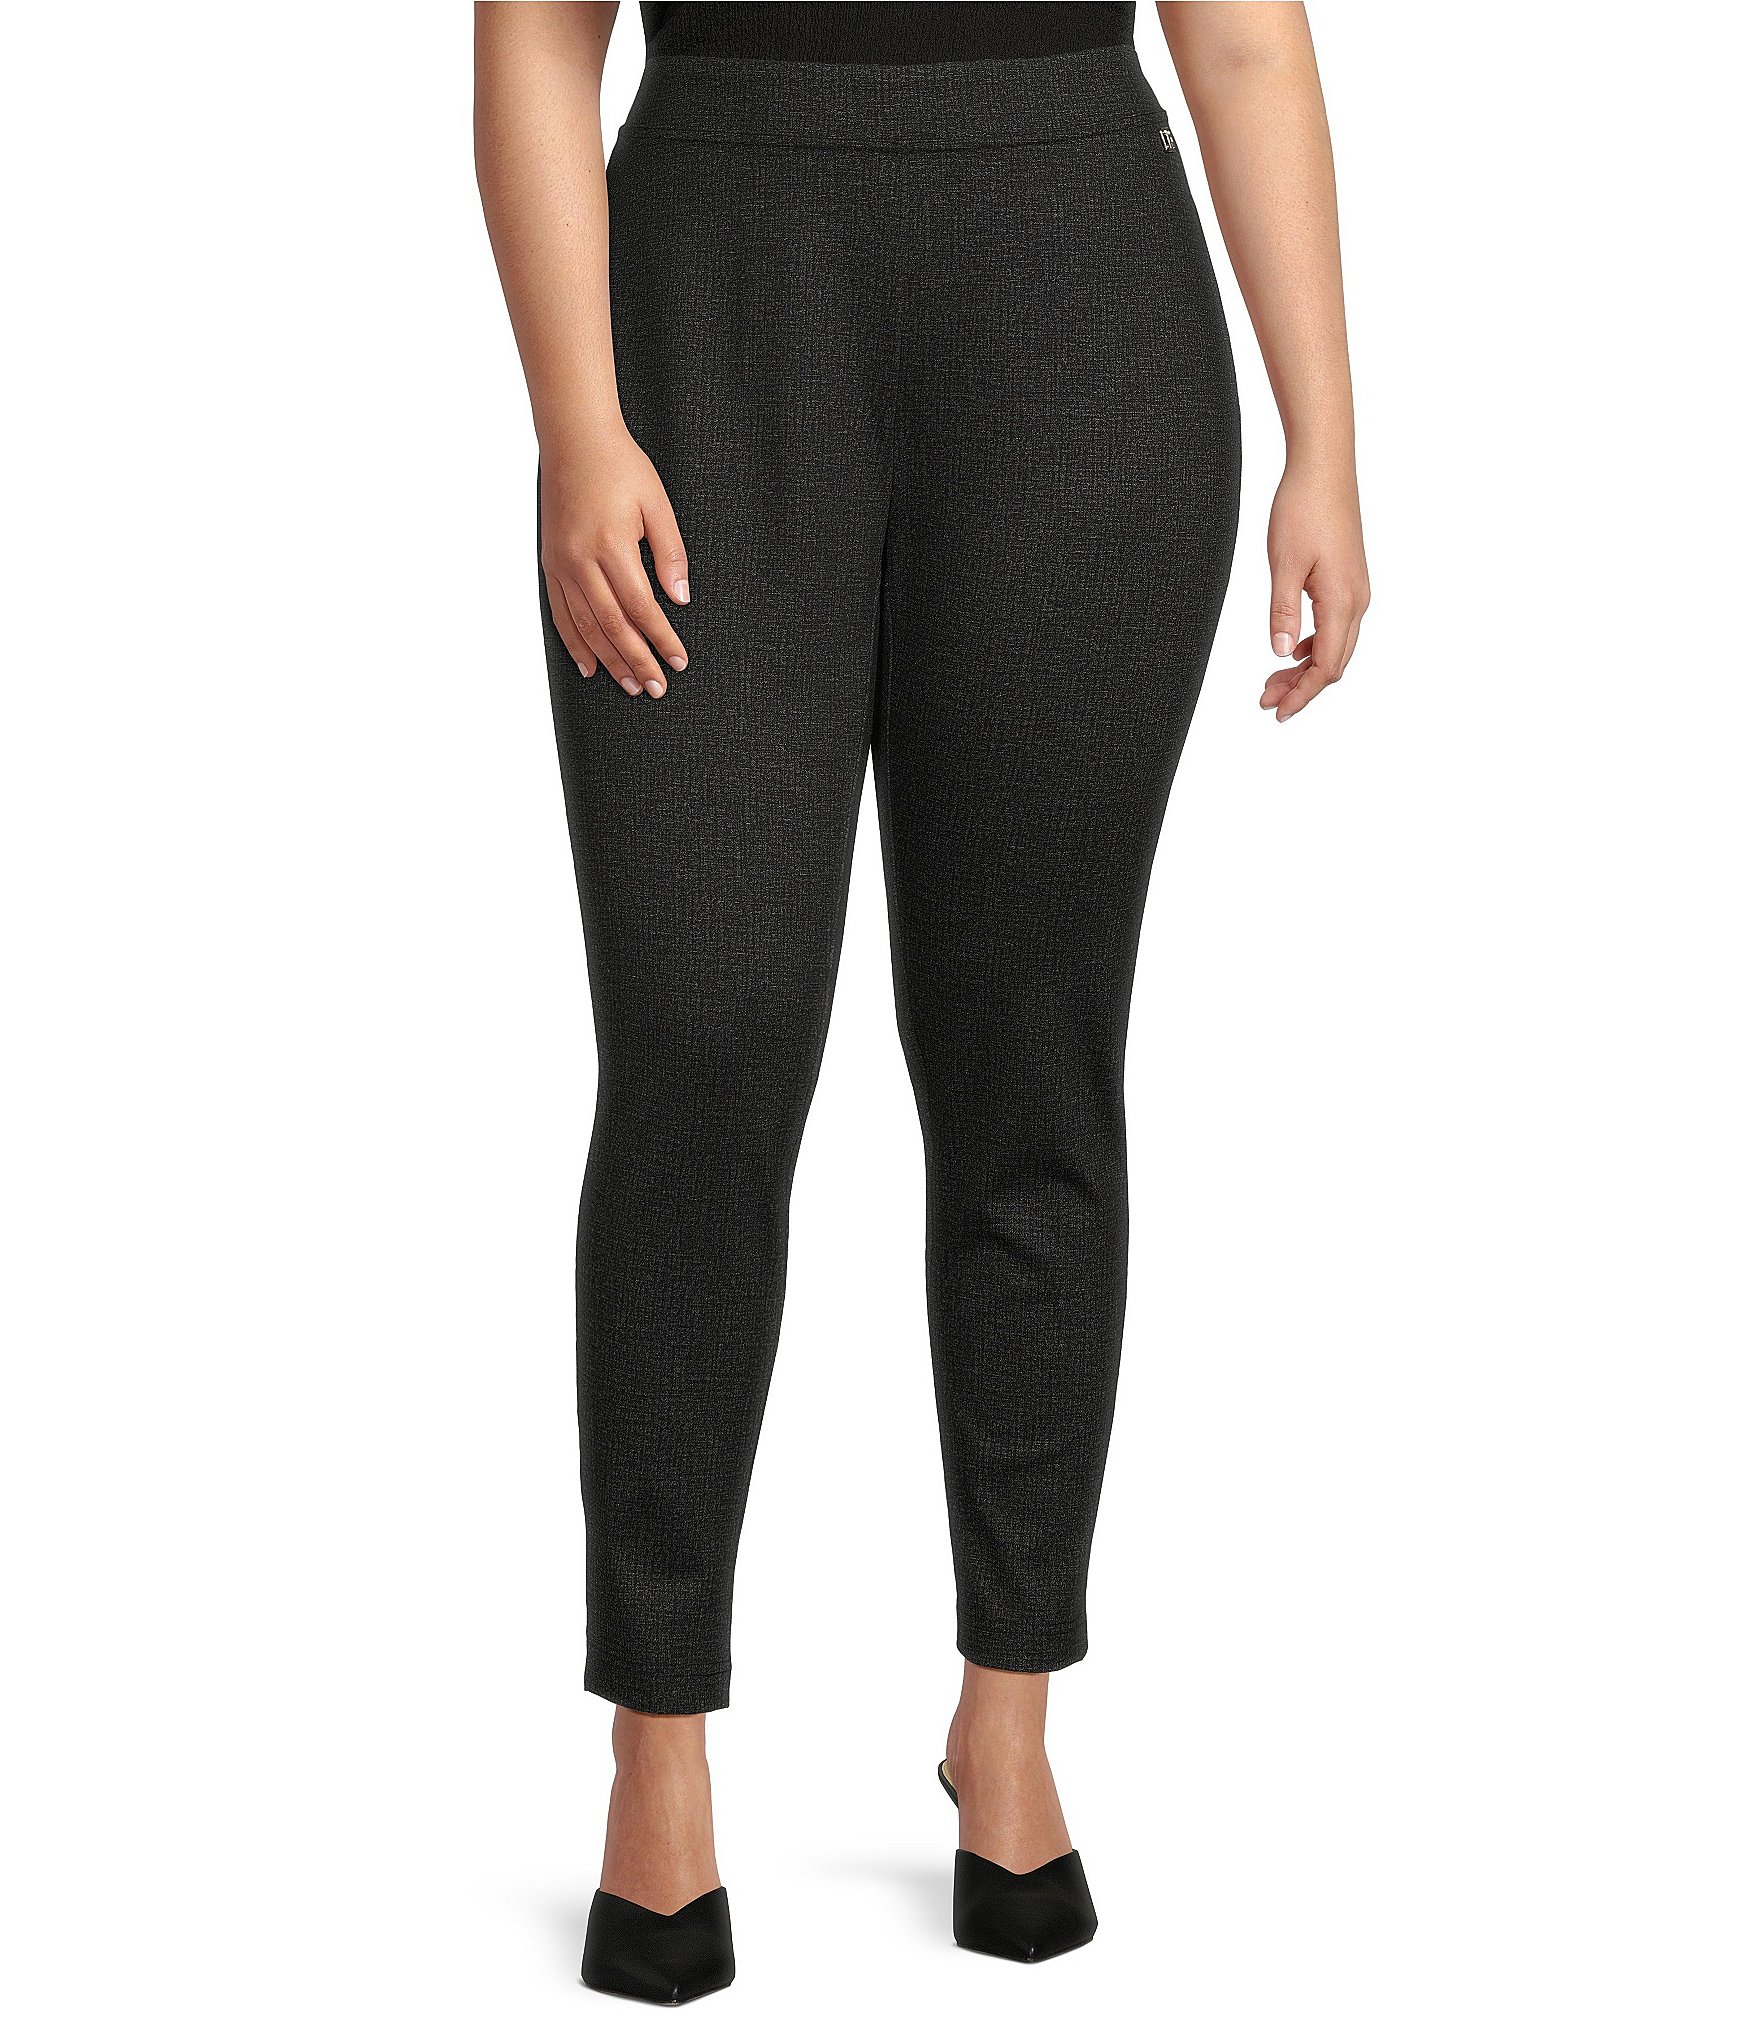 Shop Prisma's White Cuff Length Leggings for Comfortable Style